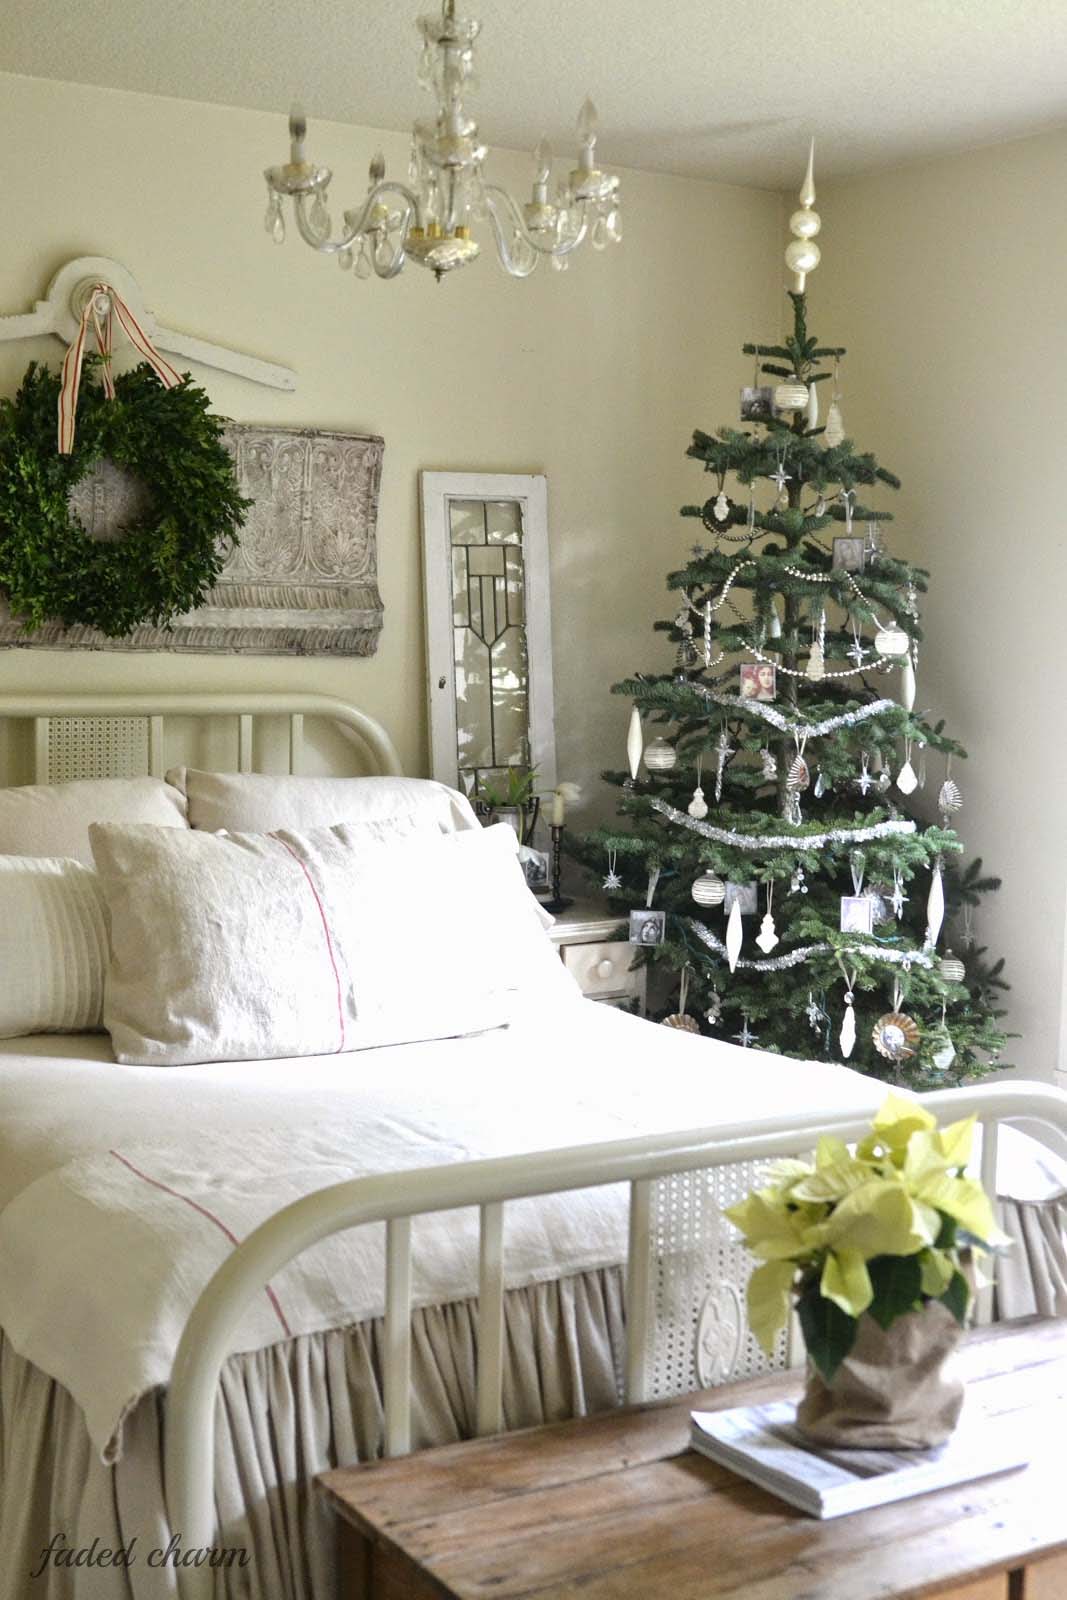 Decorating Your Bedroom for Christmas